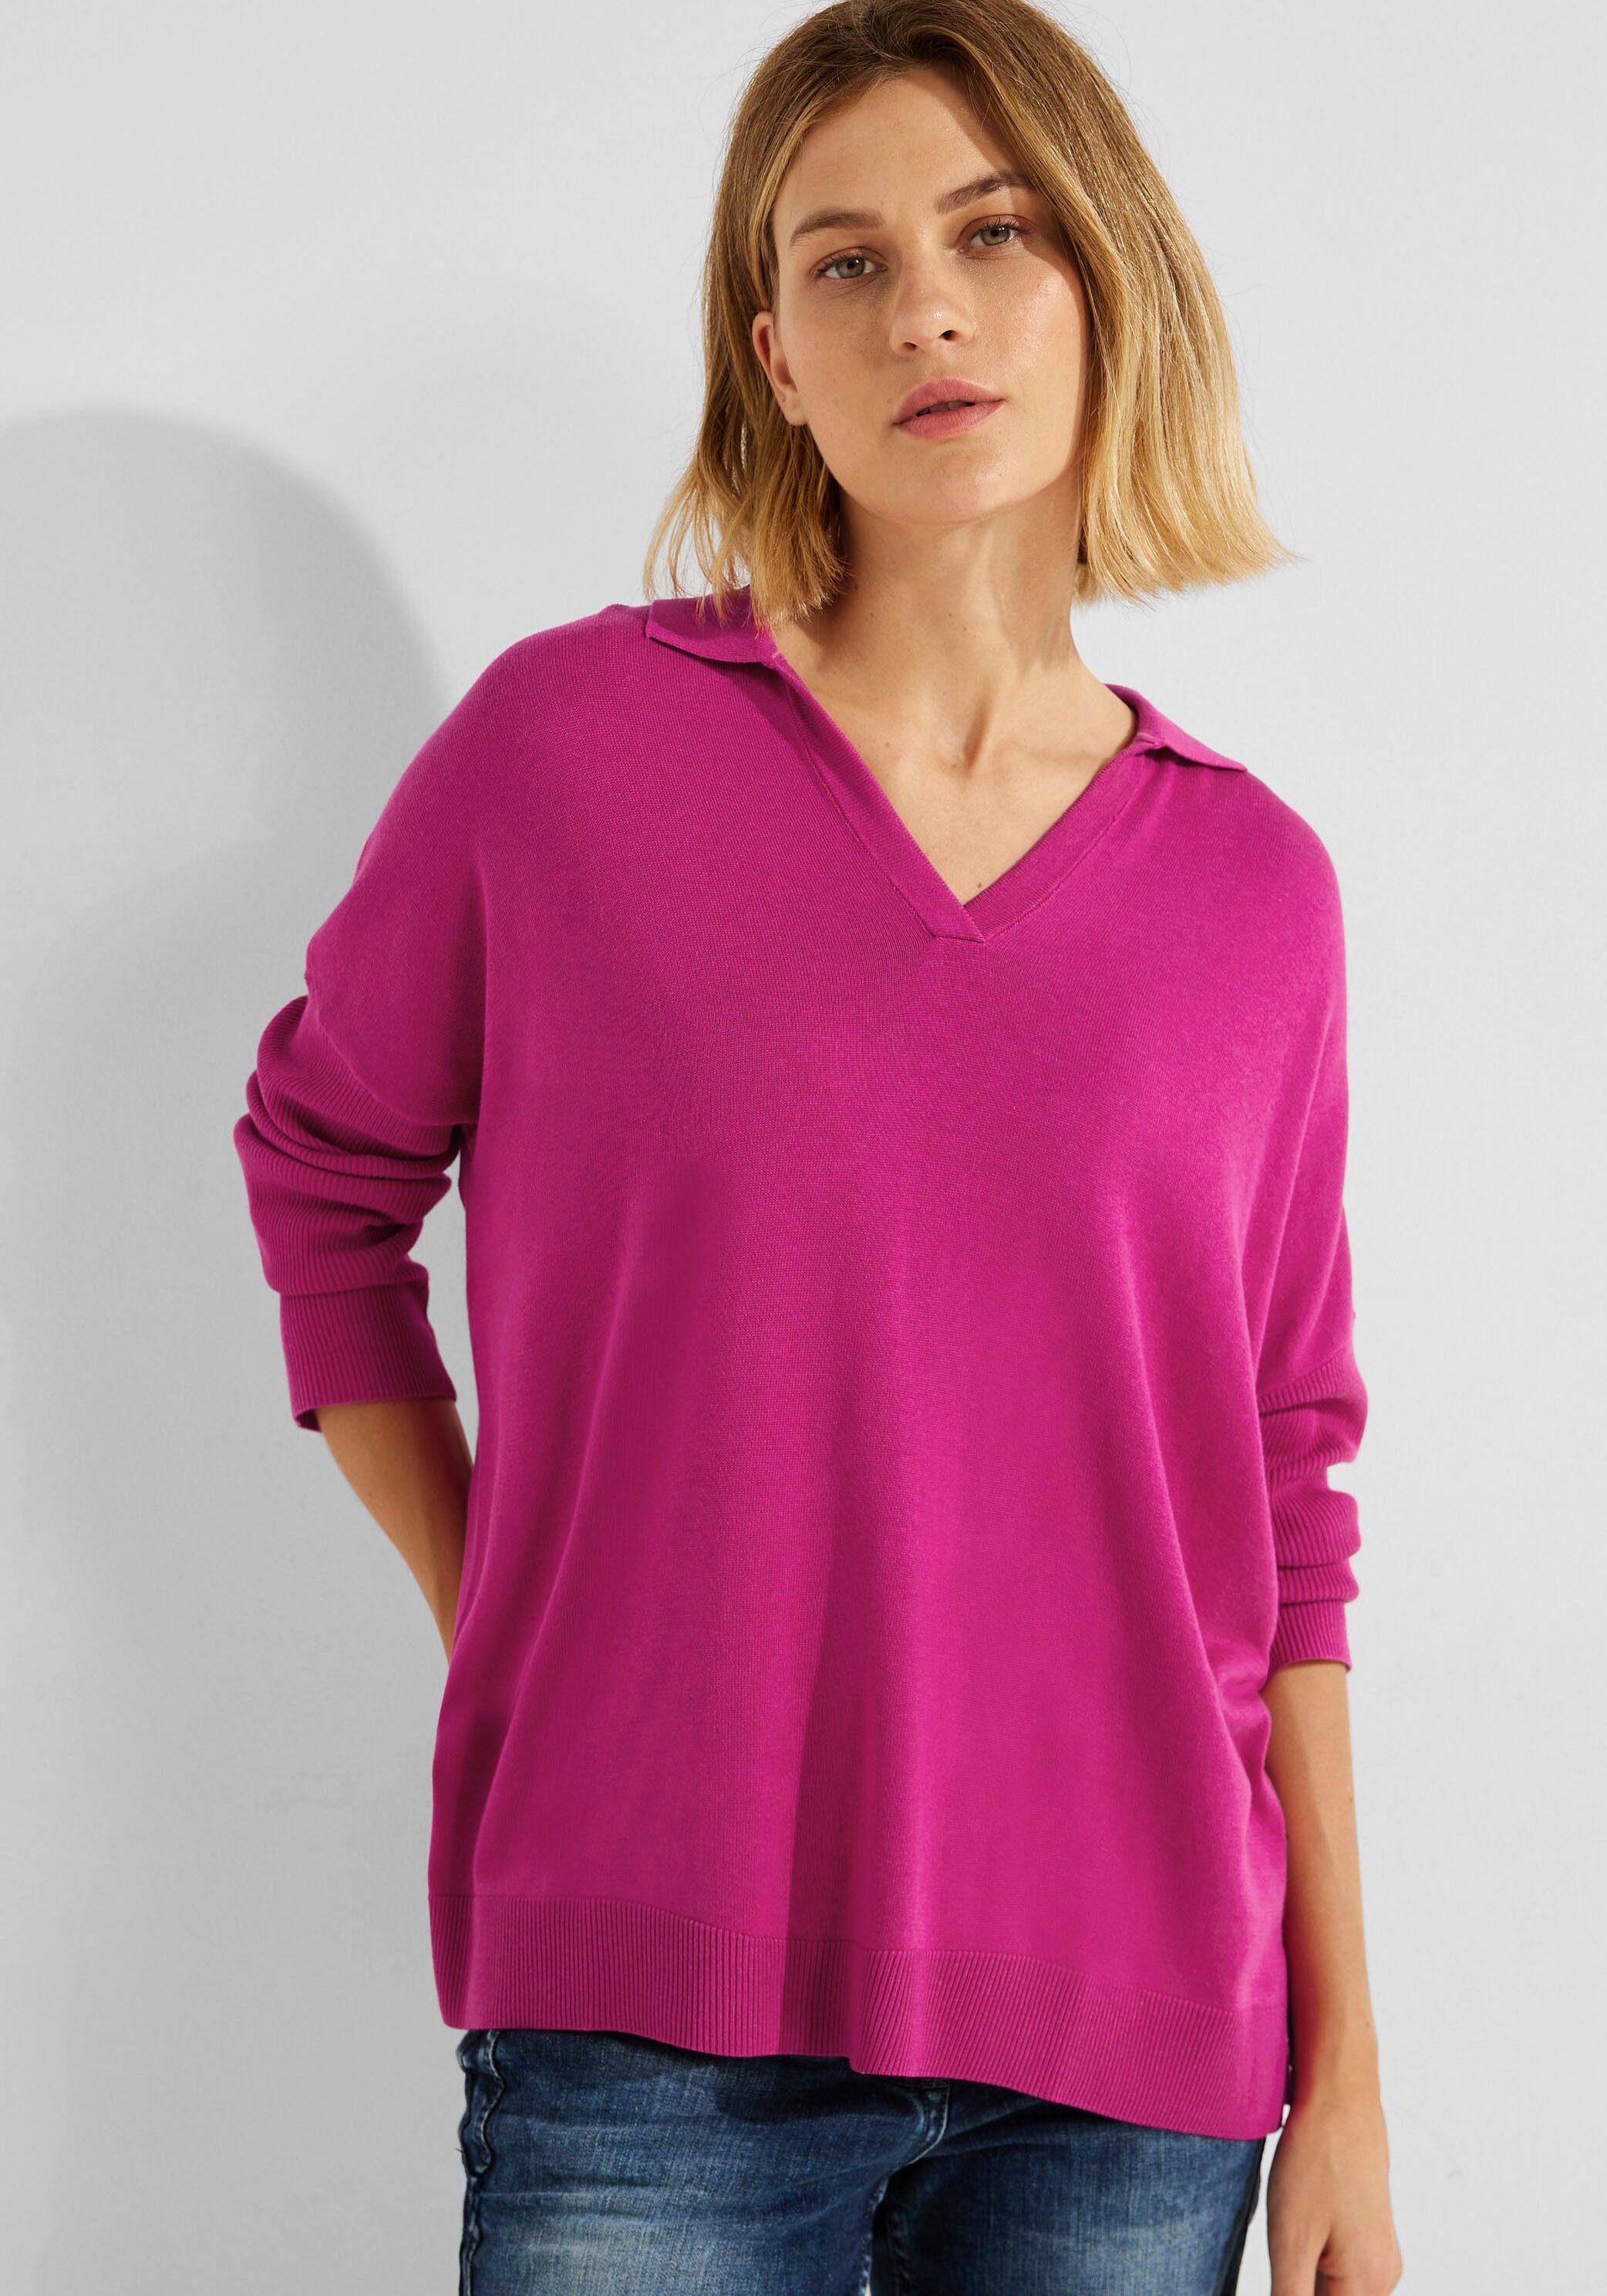 Unifarbe Polokragenpullover Cecil in pink cool